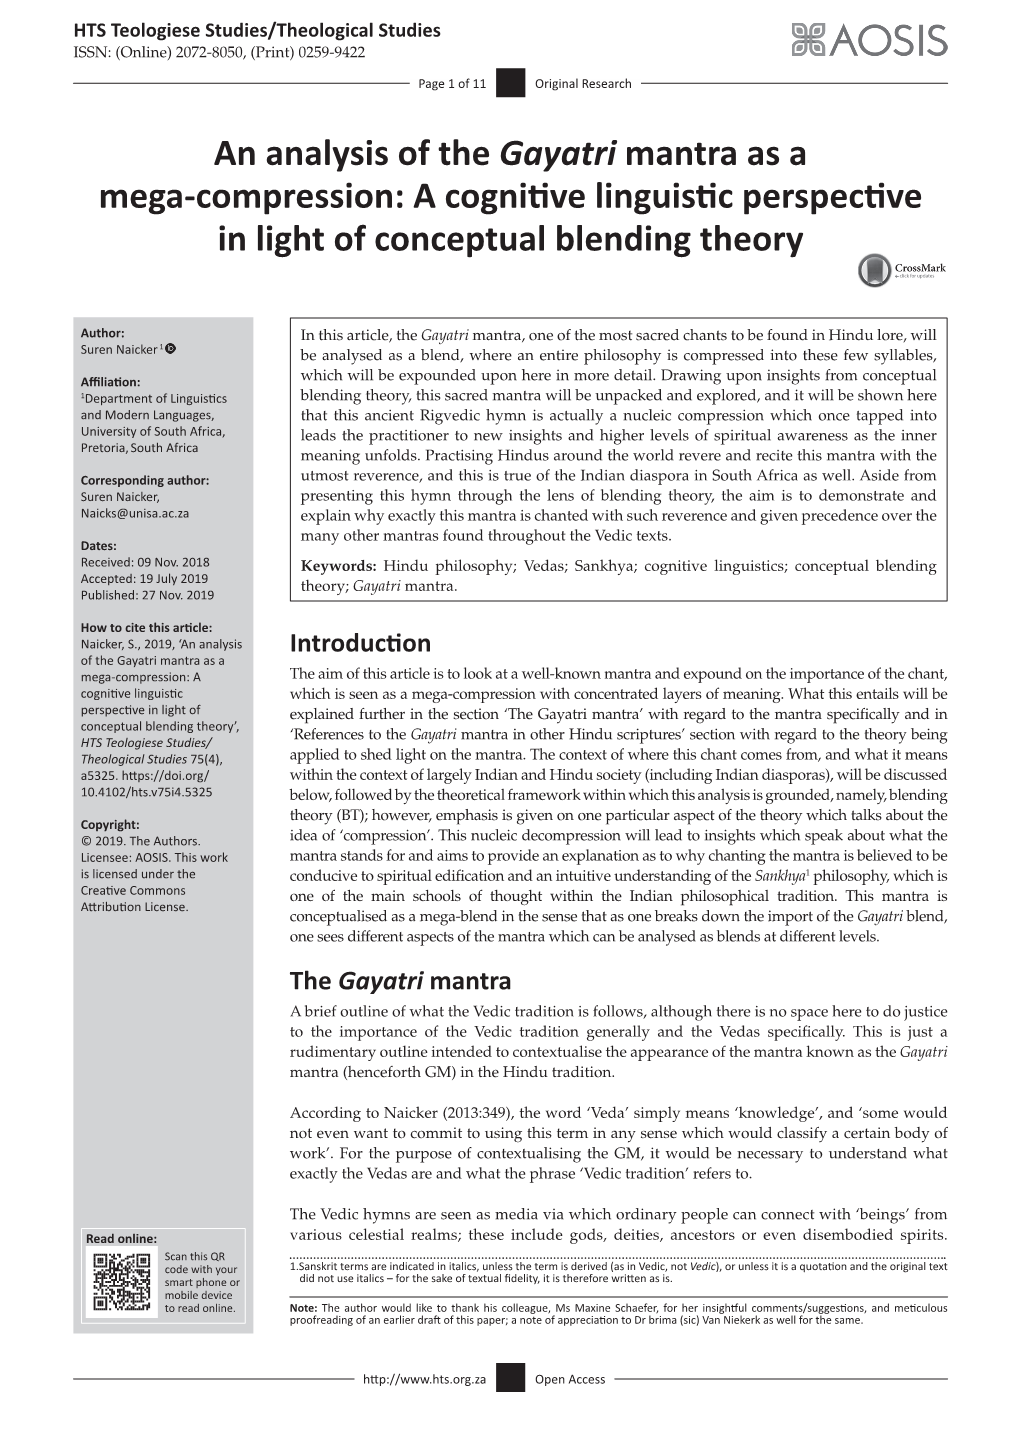 An Analysis of the Gayatri Mantra As a Mega-Compression: a Cognitive Linguistic Perspective in Light of Conceptual Blending Theory